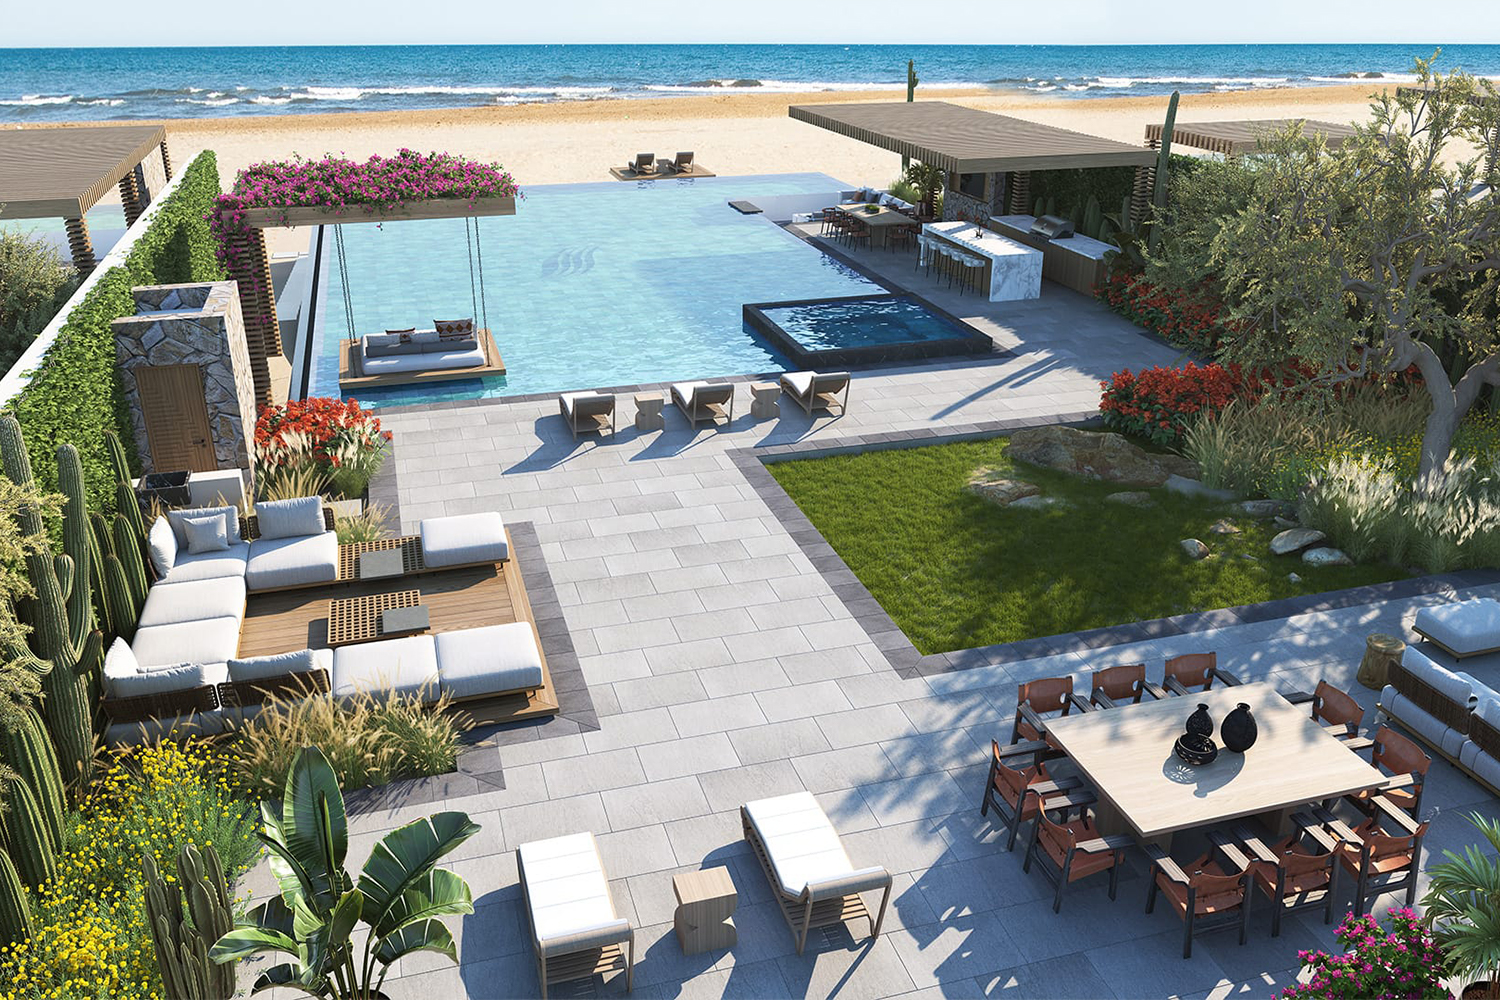 A rendering of St. Regis Los Cabos, a new property opening west of Cabo San Lucas set to open in 2023 in Quivira